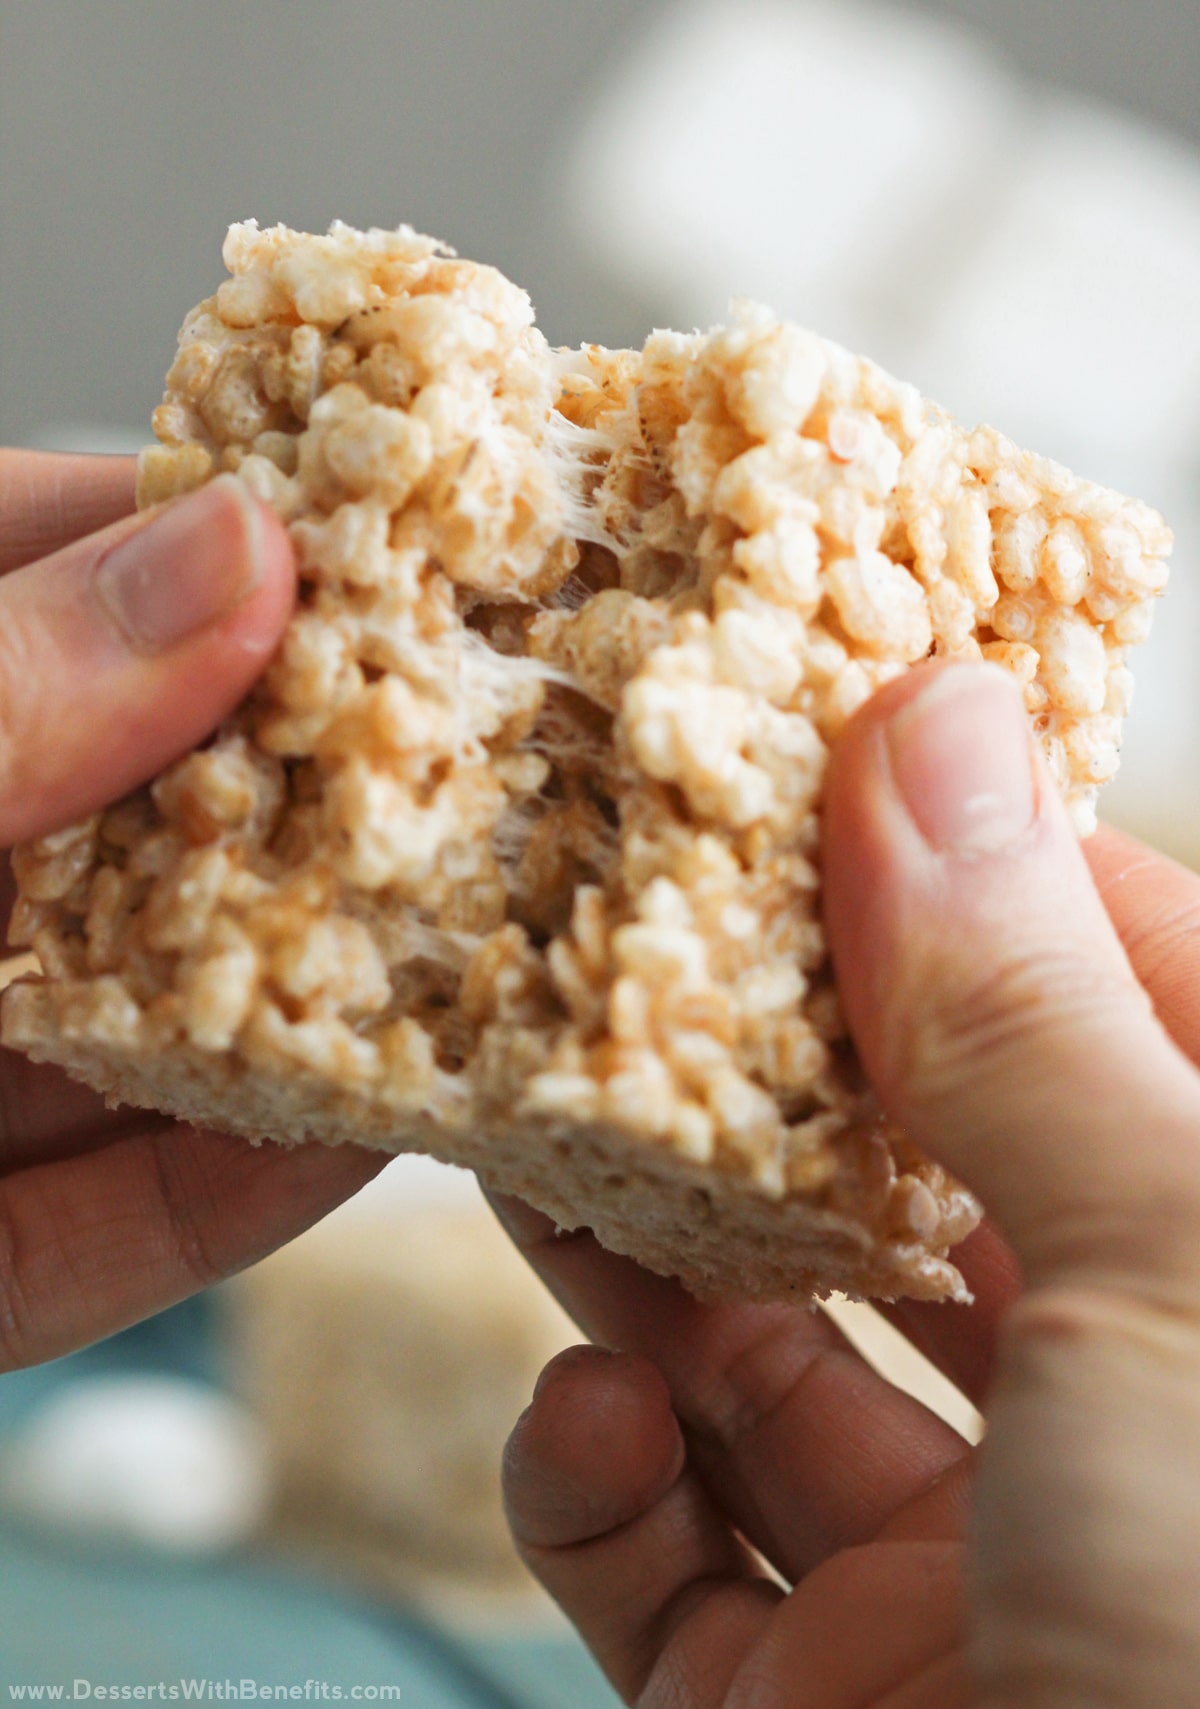 Super simple, quick, and easy 3-ingredient Healthy Krispy Treats recipe (plus Chocolate-Dipped Heart-Shaped Krispy Treats perfect for Valentine’s Day) – these homemade treats are sweet, chewy and crunchy, you’d never know they’re all natural, low fat, refined sugar free, and gluten free! Healthy Dessert Recipes at Desserts with Benefits